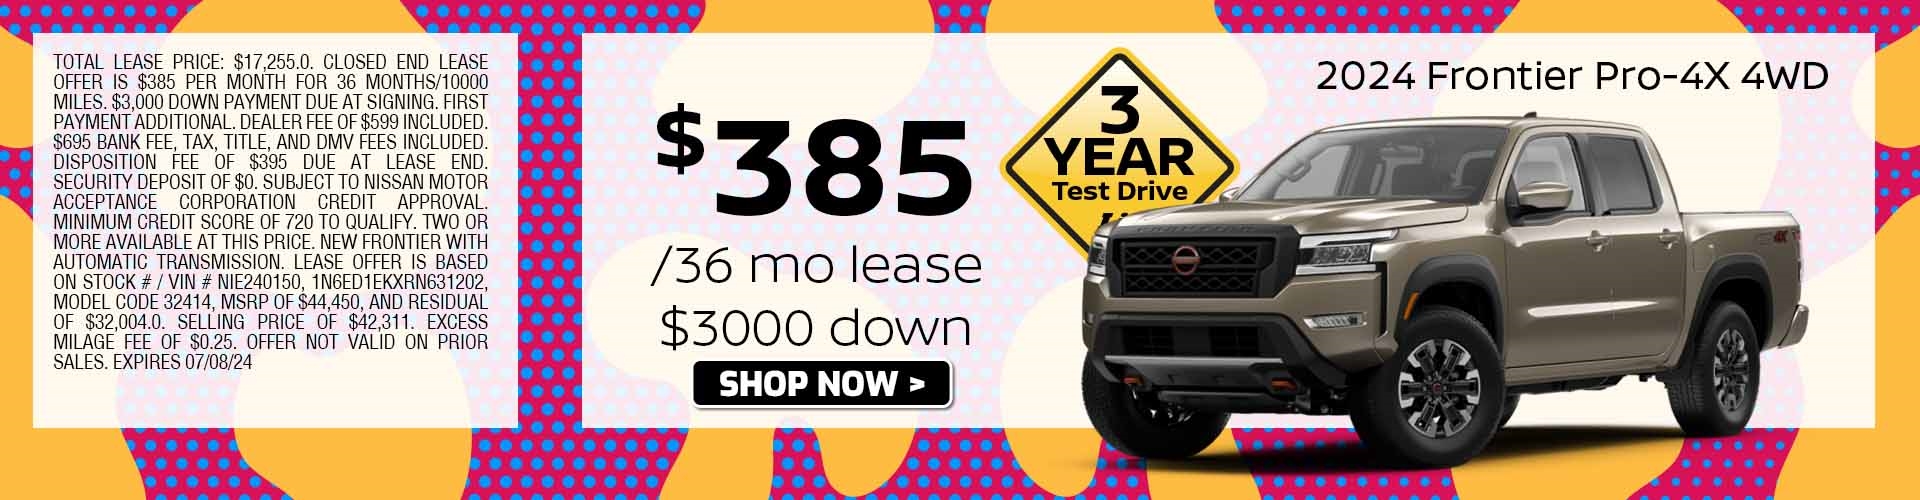 frontier lease special